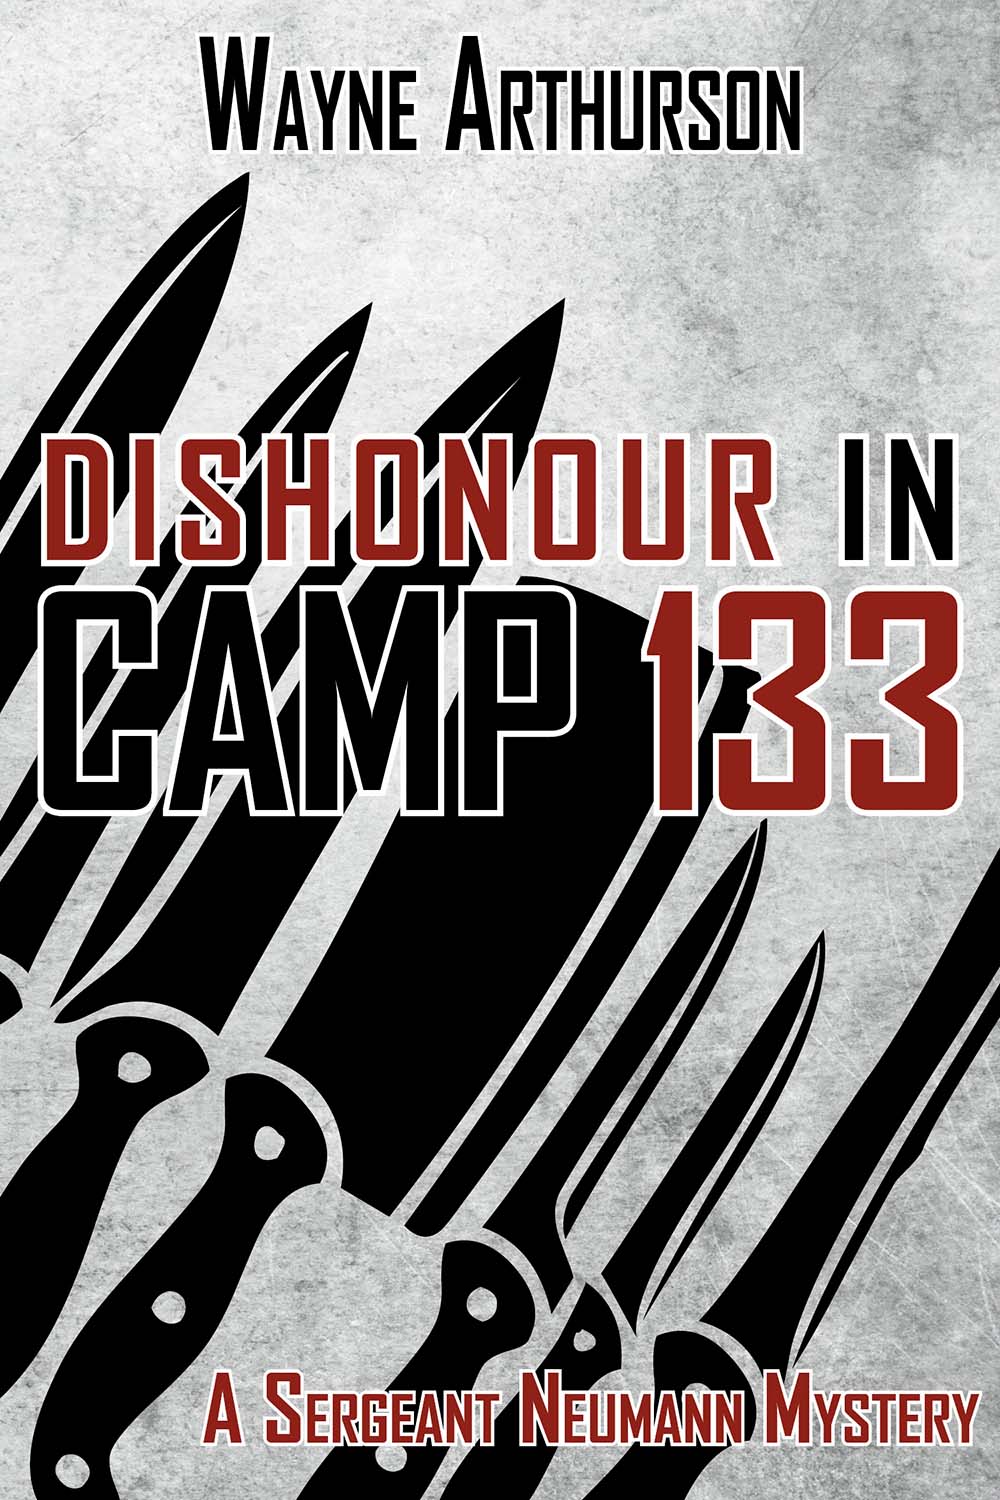 Cover: Dishonour in Camp 133 by Wayne Arthurson